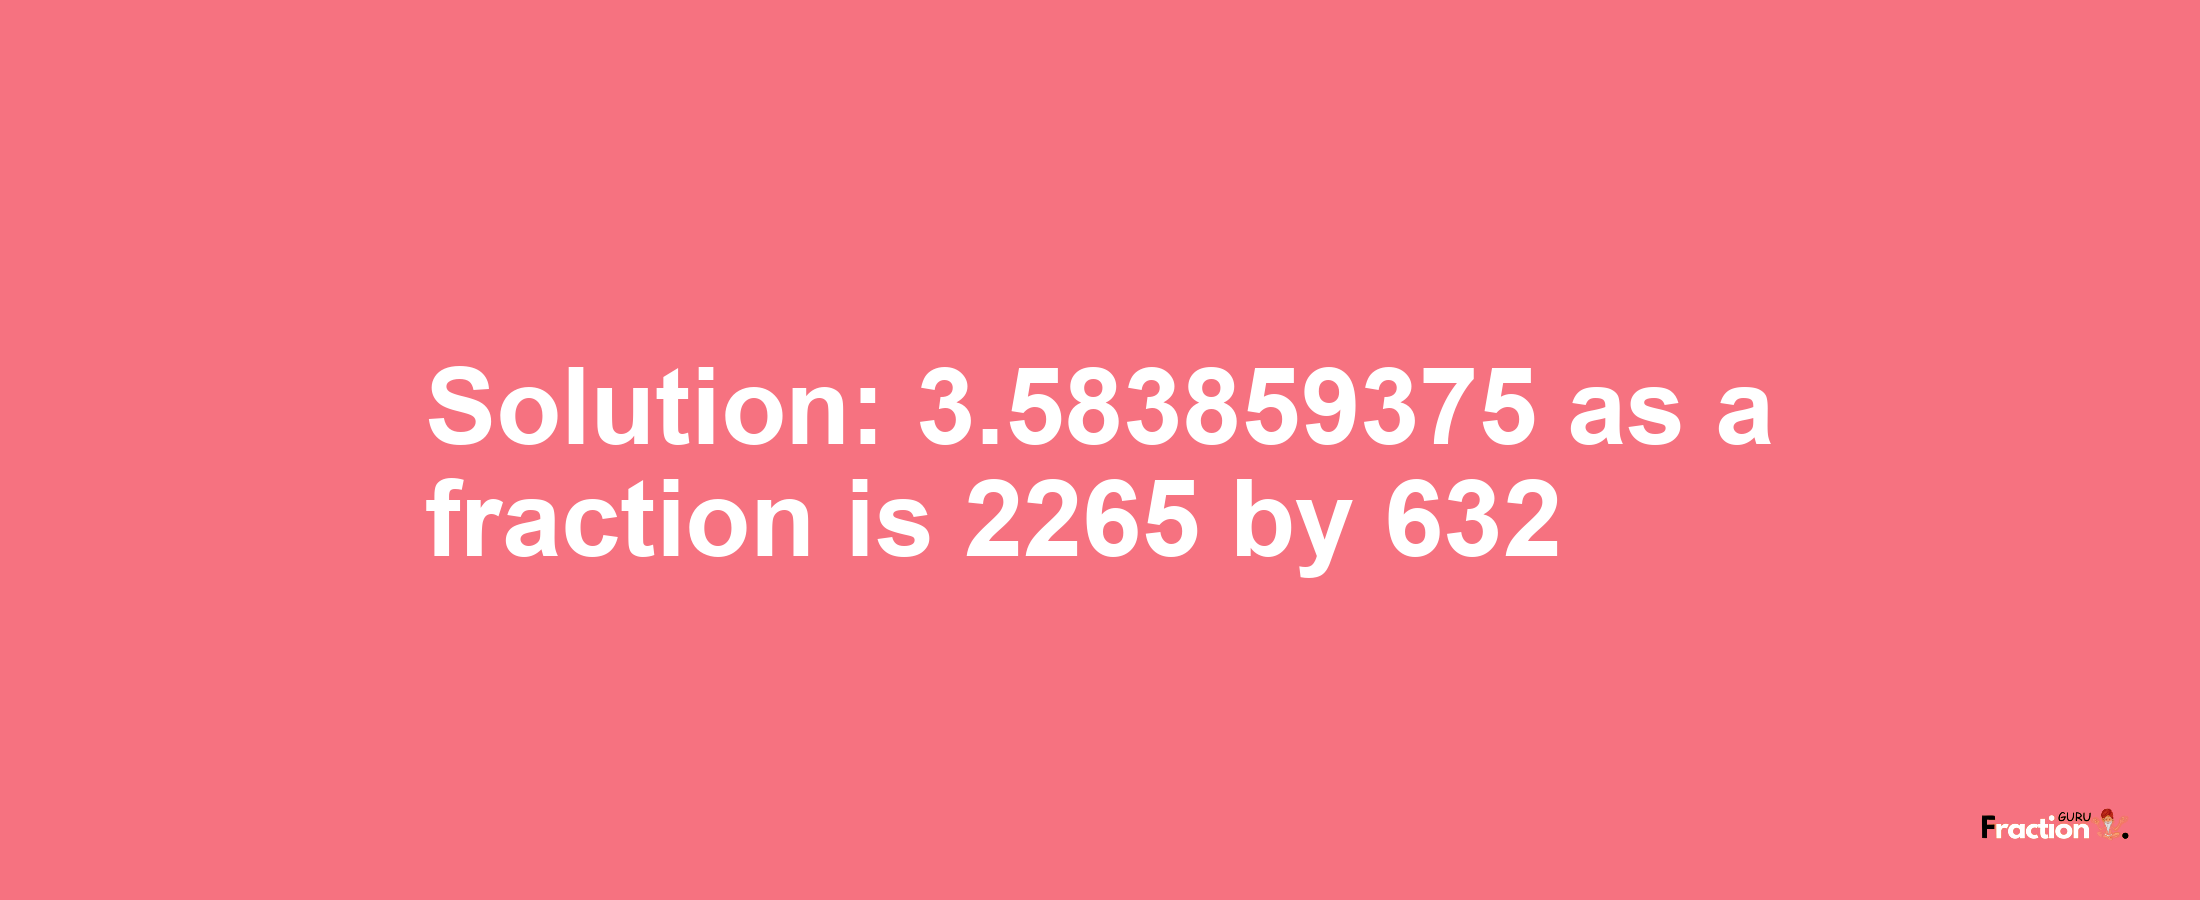 Solution:3.583859375 as a fraction is 2265/632